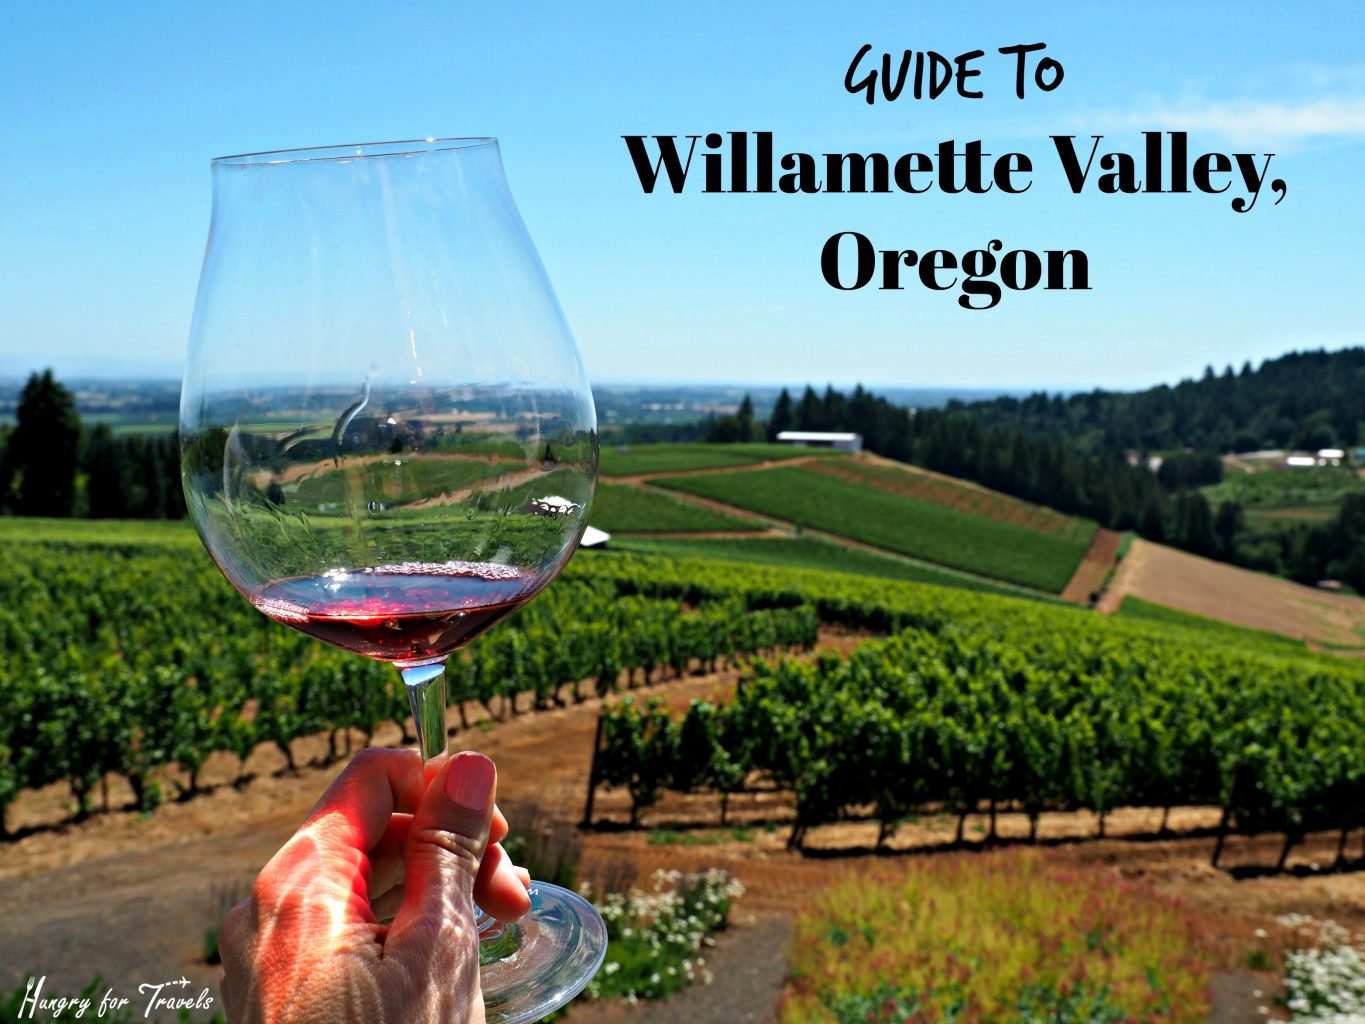 Guide to Willamette Valley, Oregon - hungryfortravels